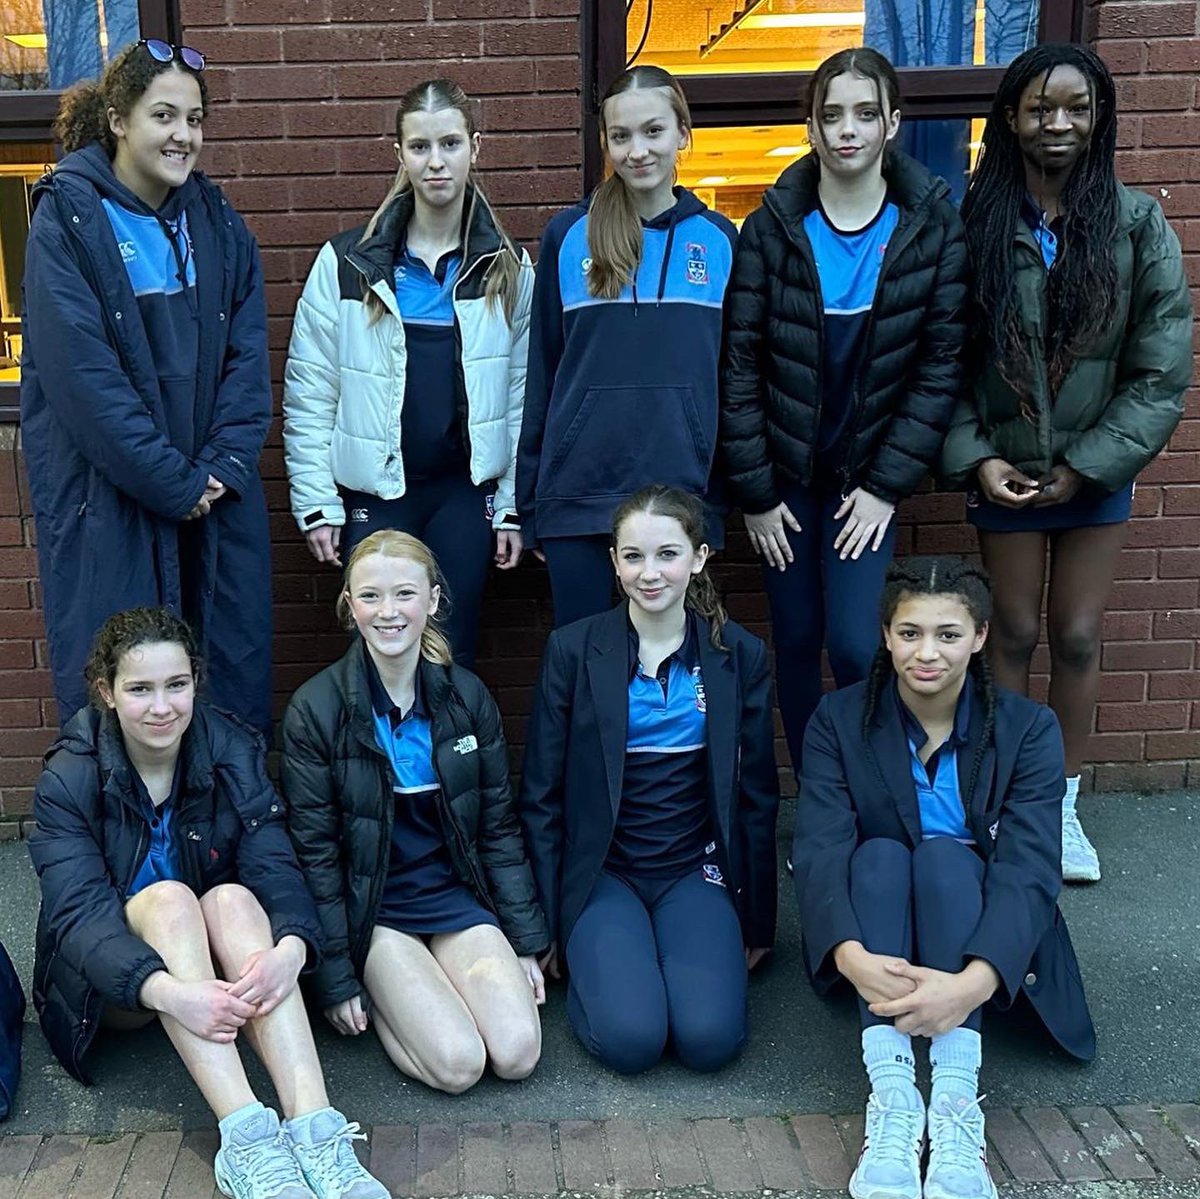 Double congratulations to our Netballers! Year 8 placed 2nd in last week’s district tournament and Year 9 are U14s District Champions for the second year in a row!🥇🥈 @OSH_Sport @osh_parents @StourbridgeNews @ExpressandStar @GoodSchoolsUK @BSAboarding @EnglandNetball #oshnetball